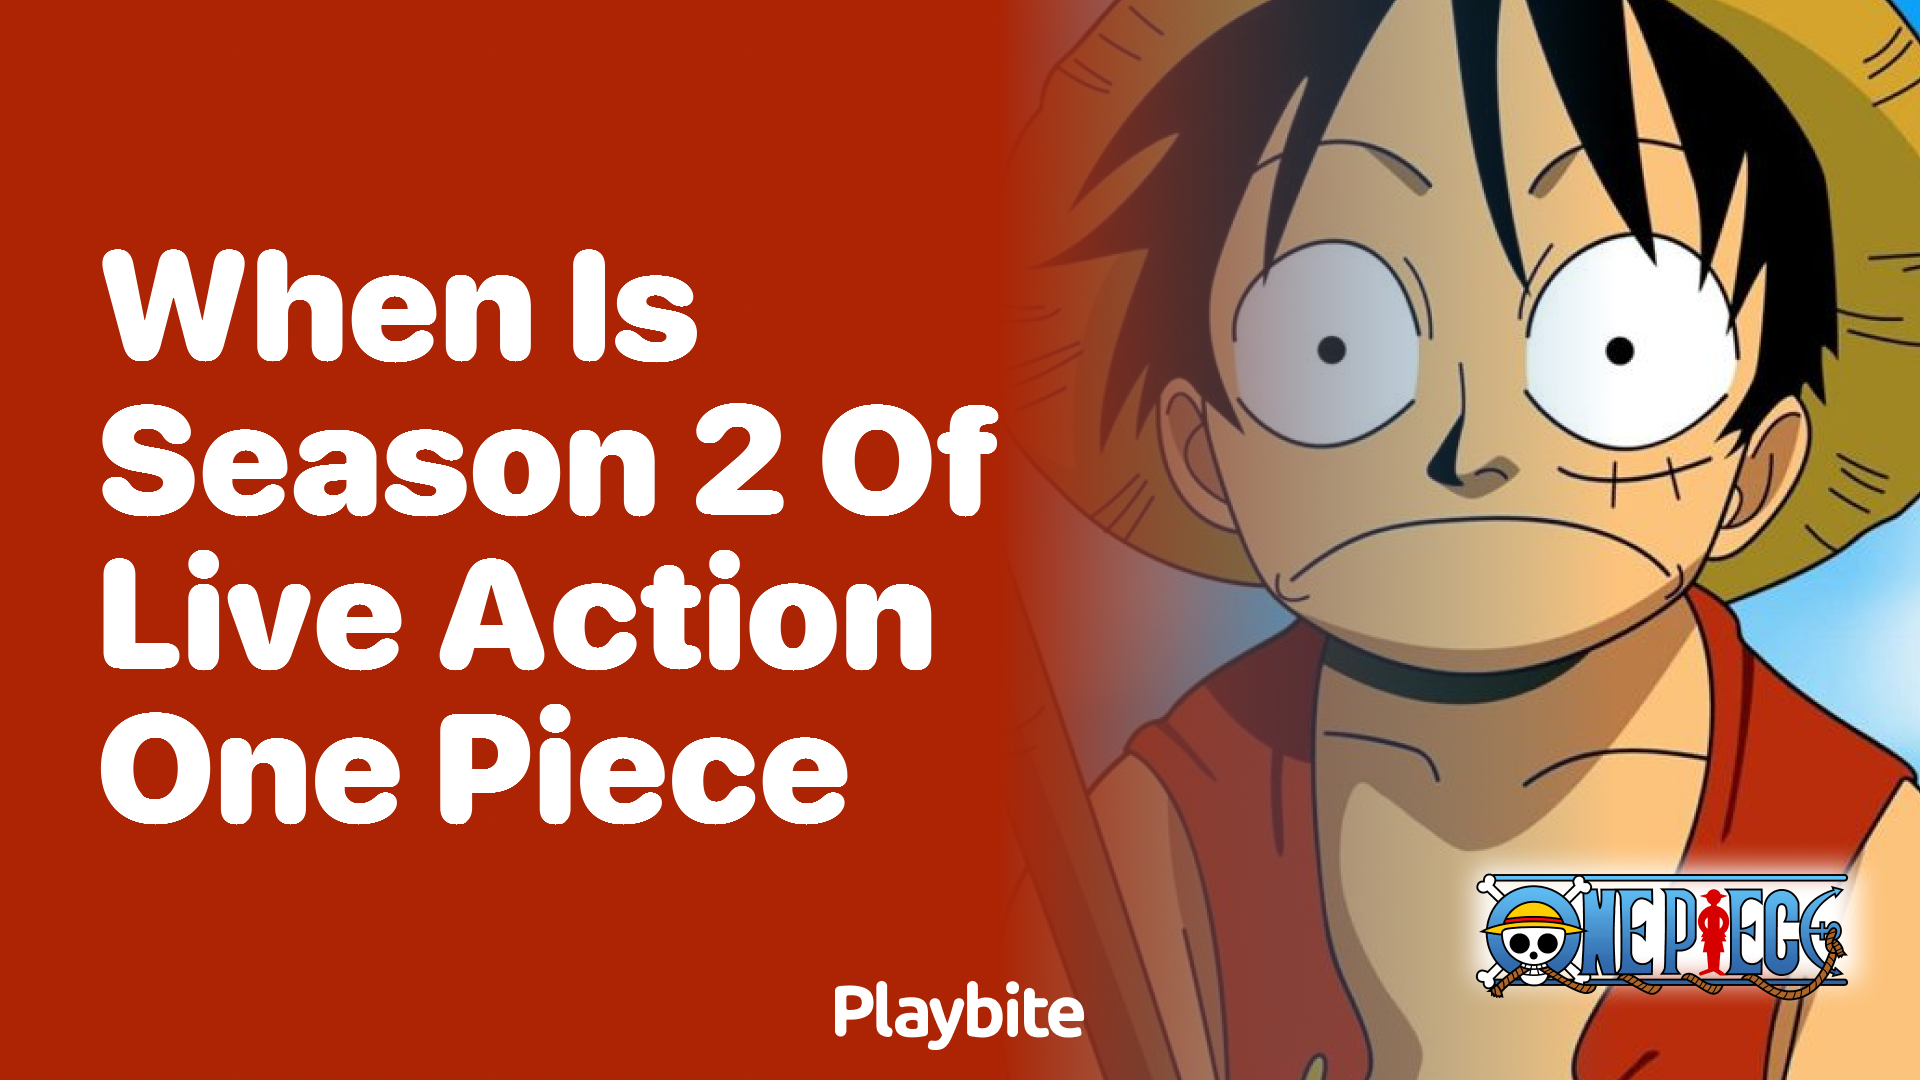 When is season 2 of the live-action One Piece coming out?